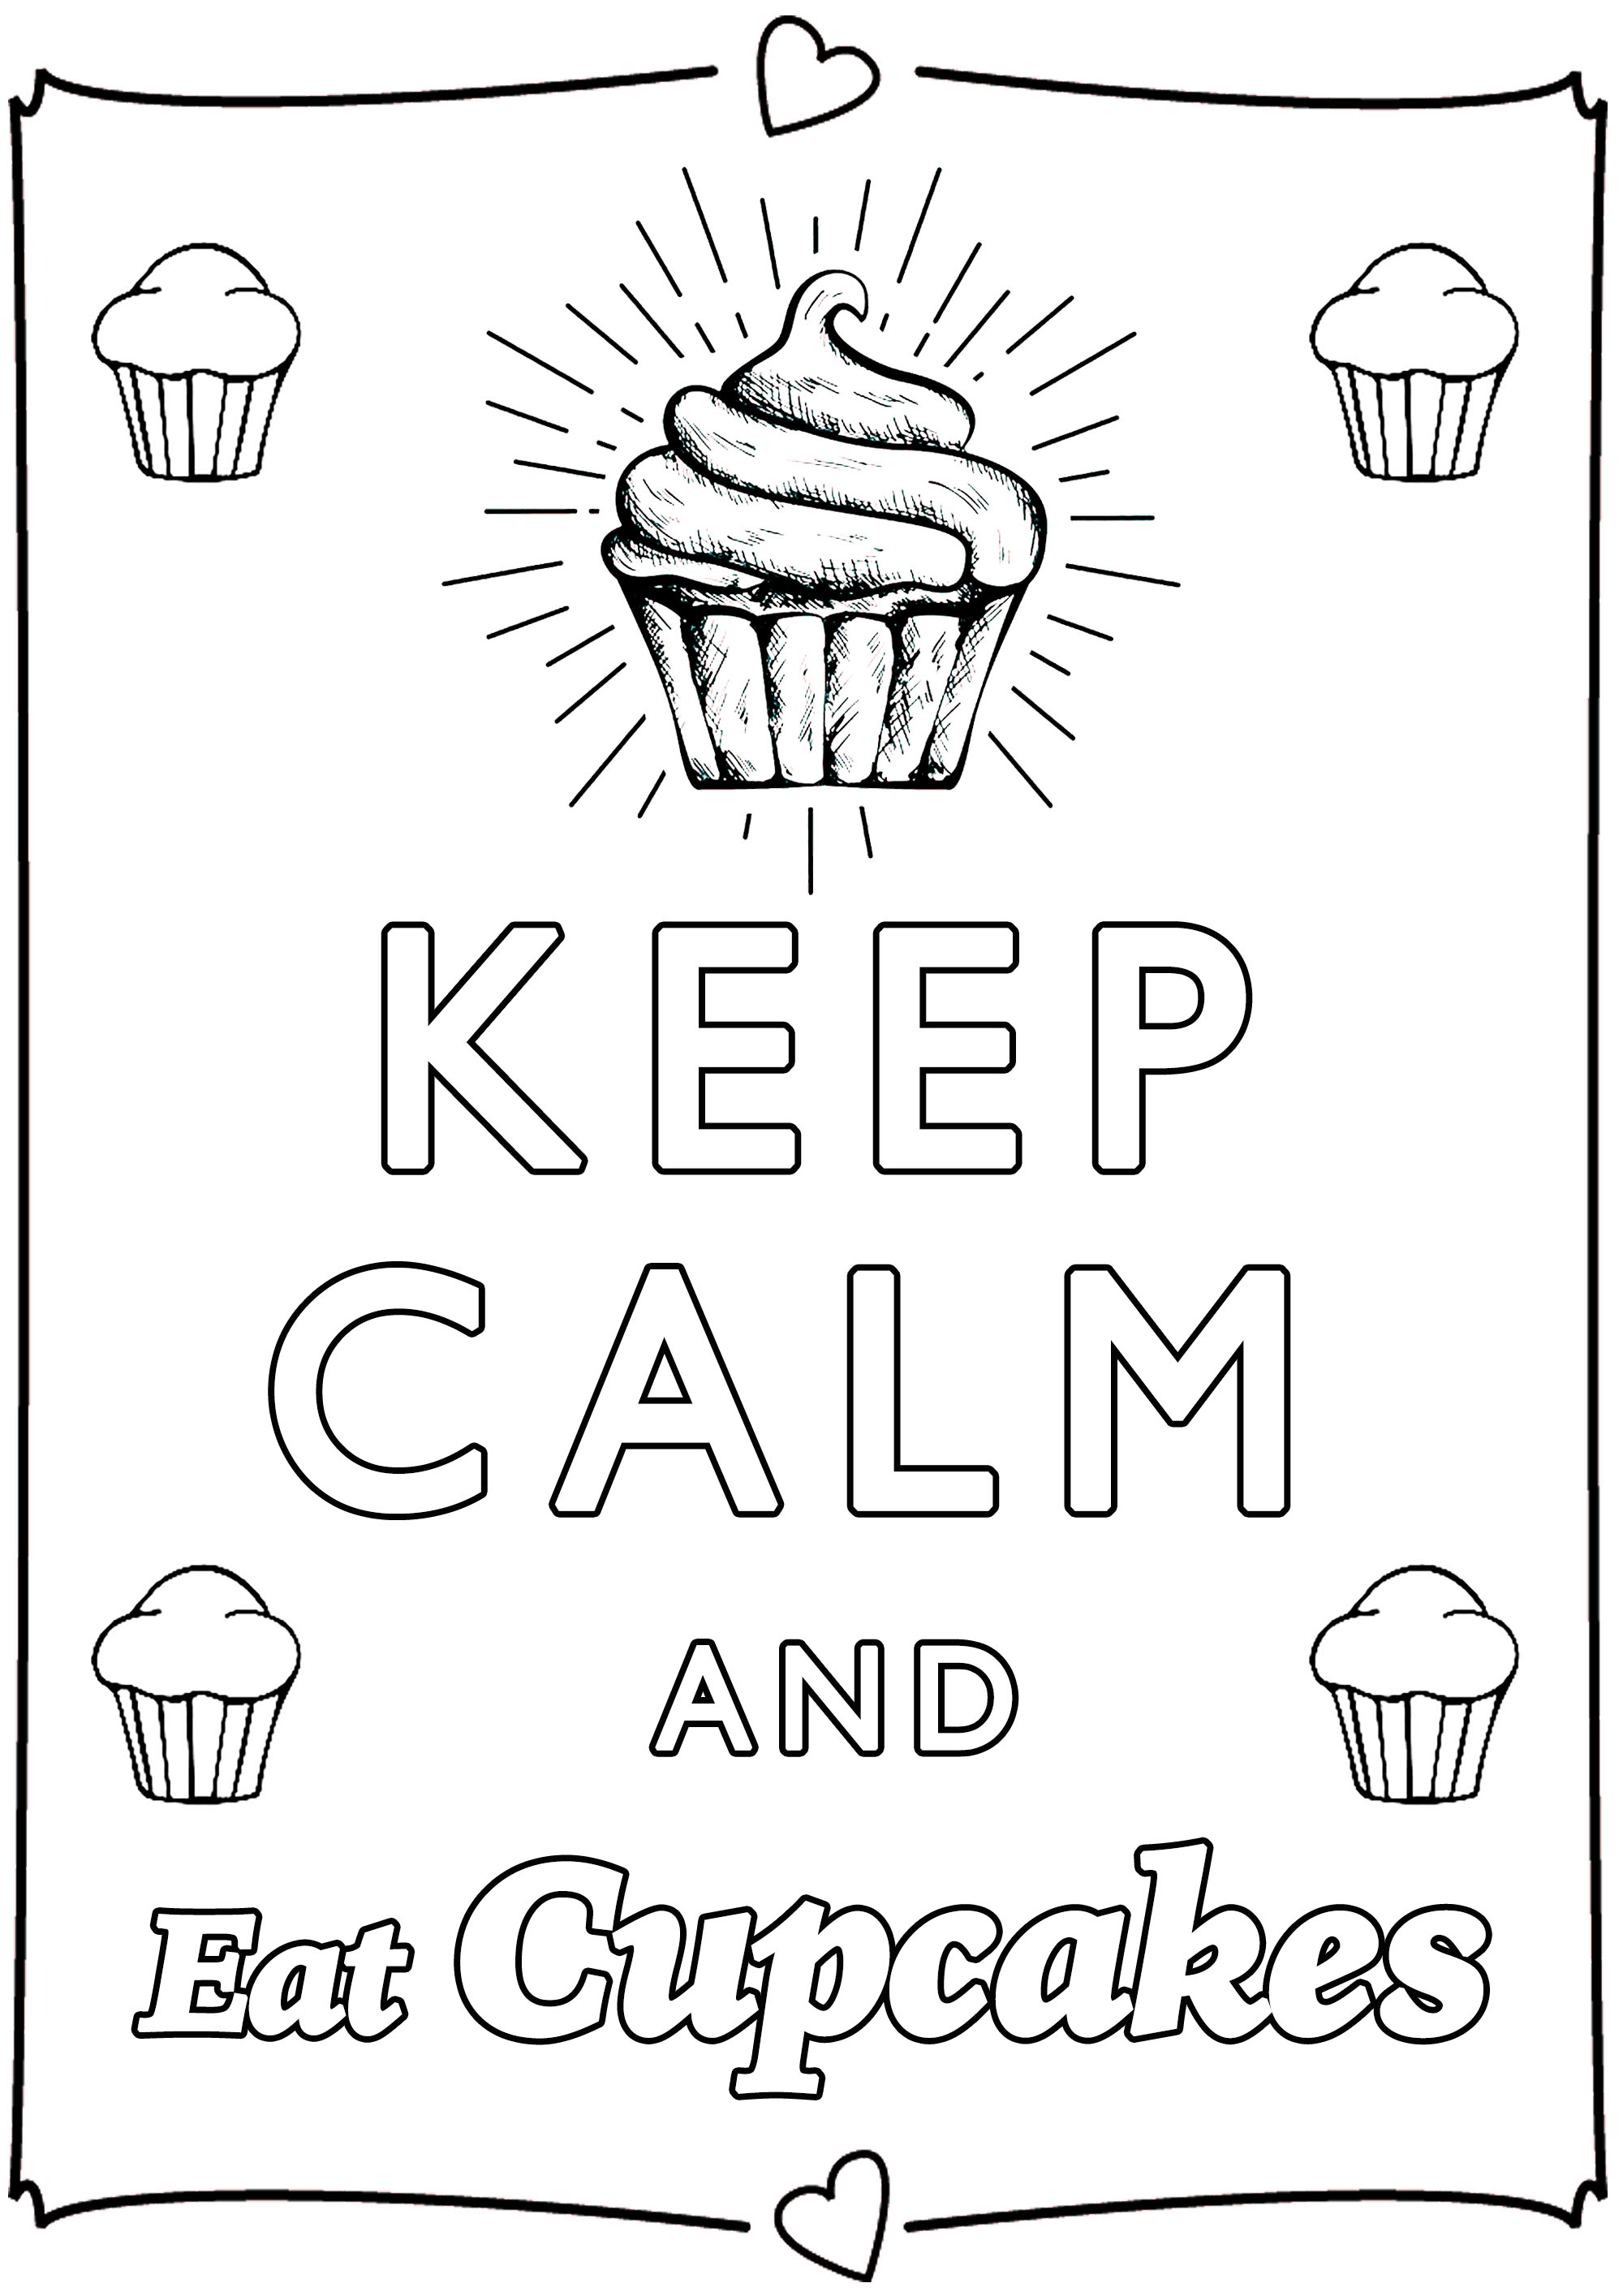 Keep calm and eat cupcakes